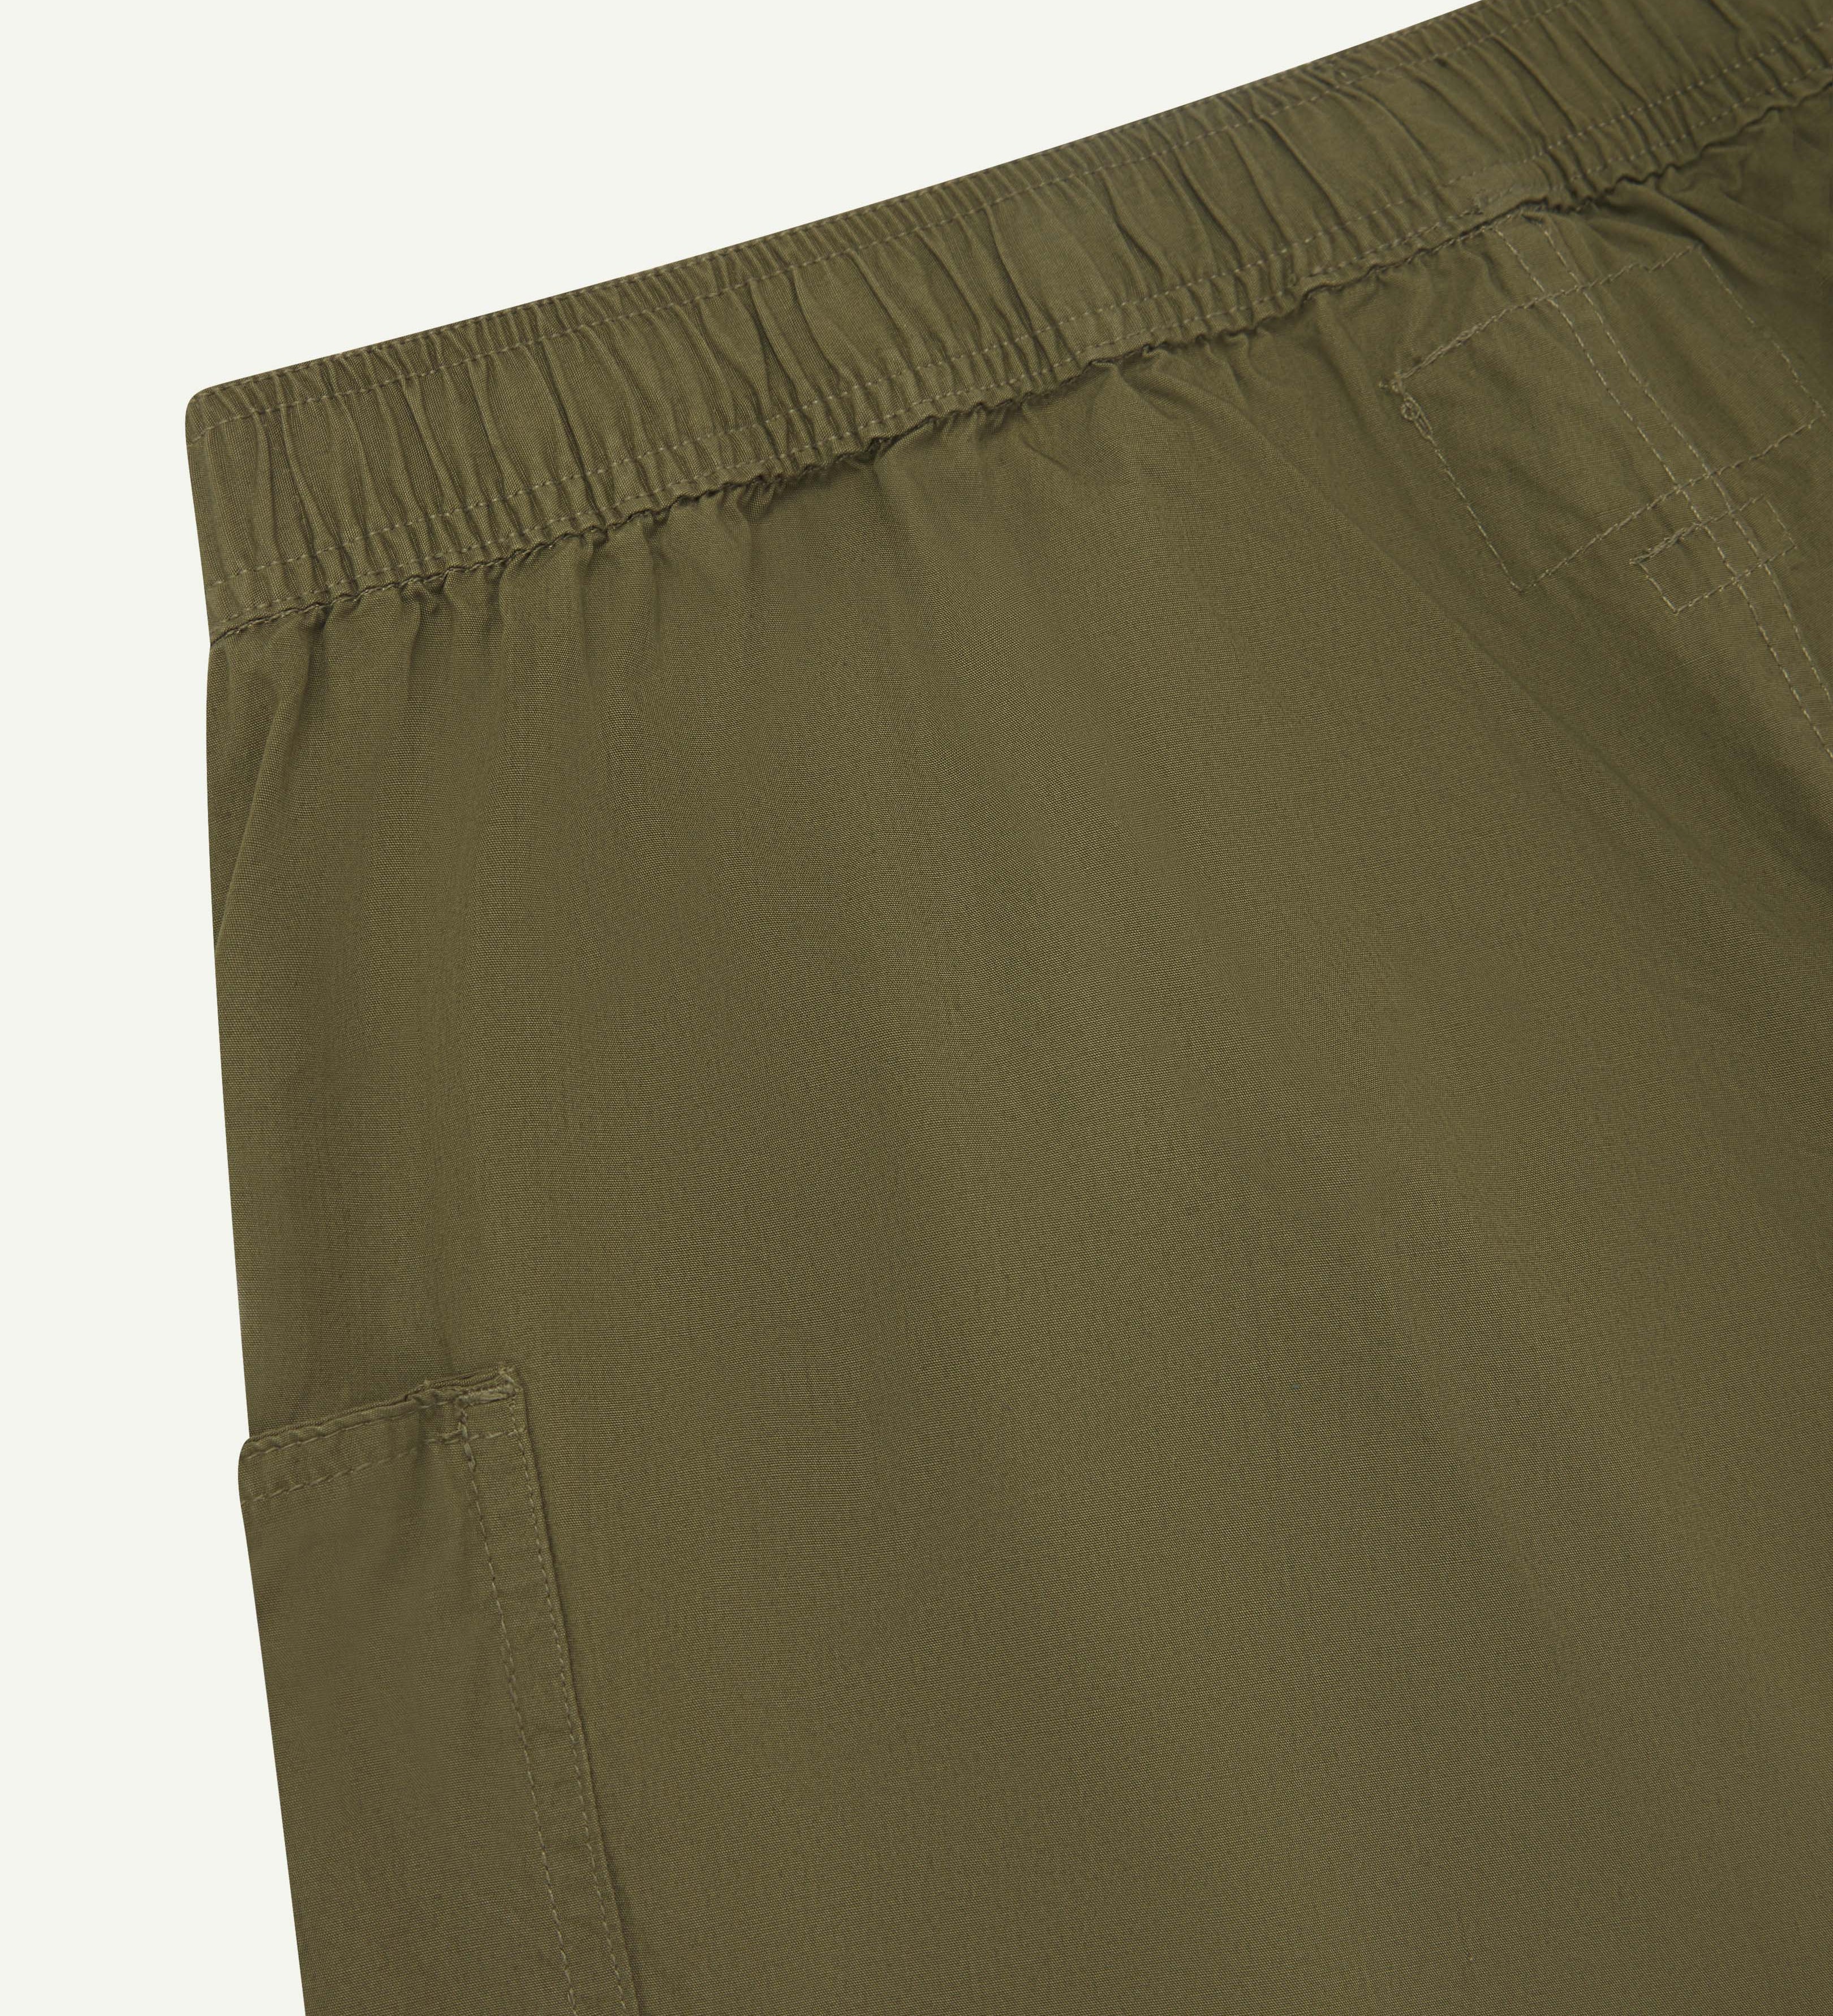 Back view of olive green organic cotton #5015 lightweight cotton shorts by Uskees. Clear view of  elasticated waist